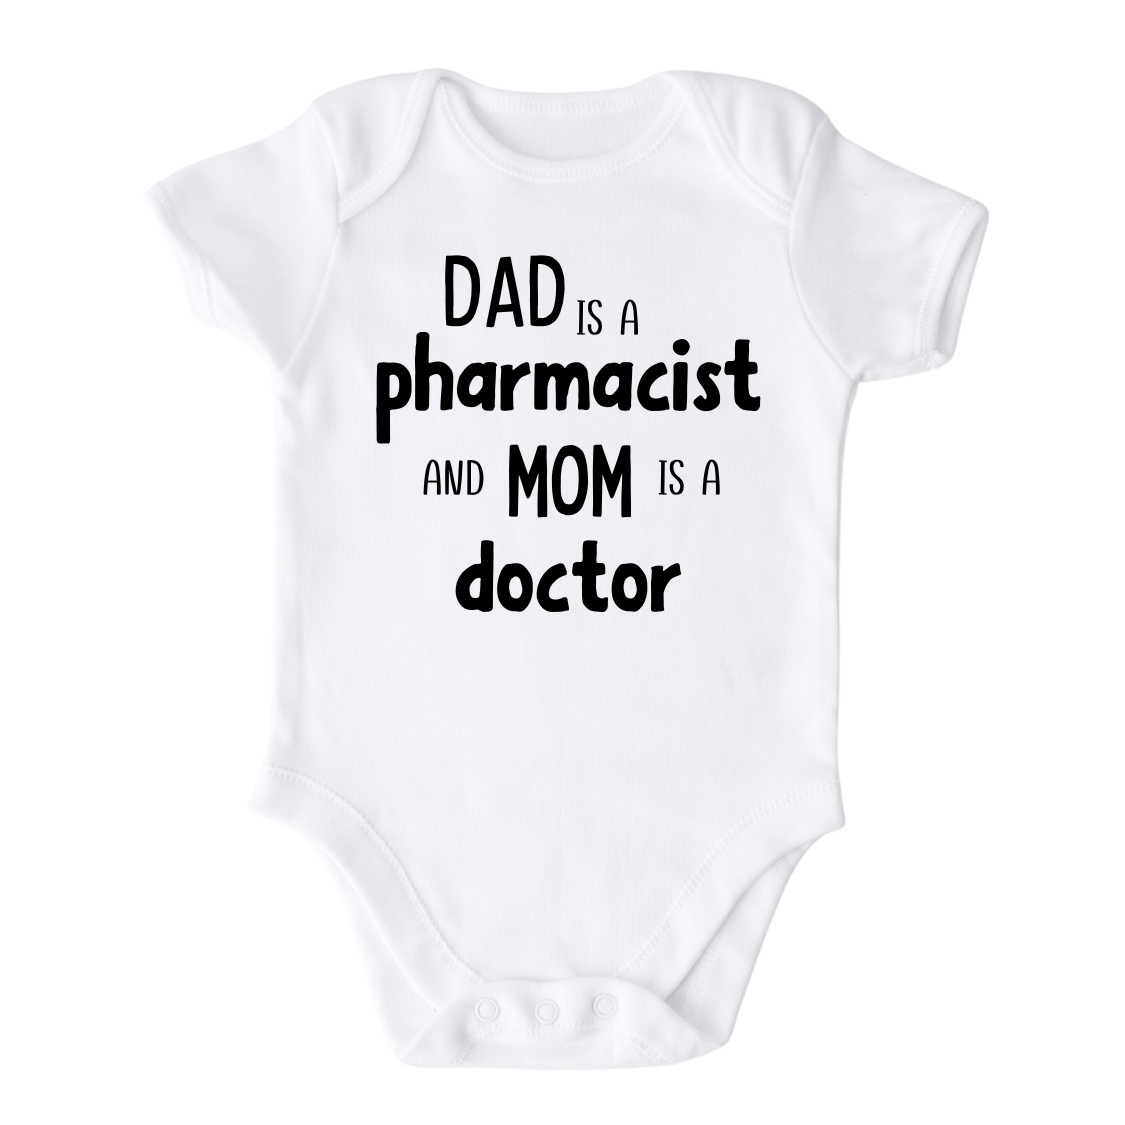 Baby Onesie® Dad Is A Pharmacist and Mom is A Doctor Baby Infant Clothing